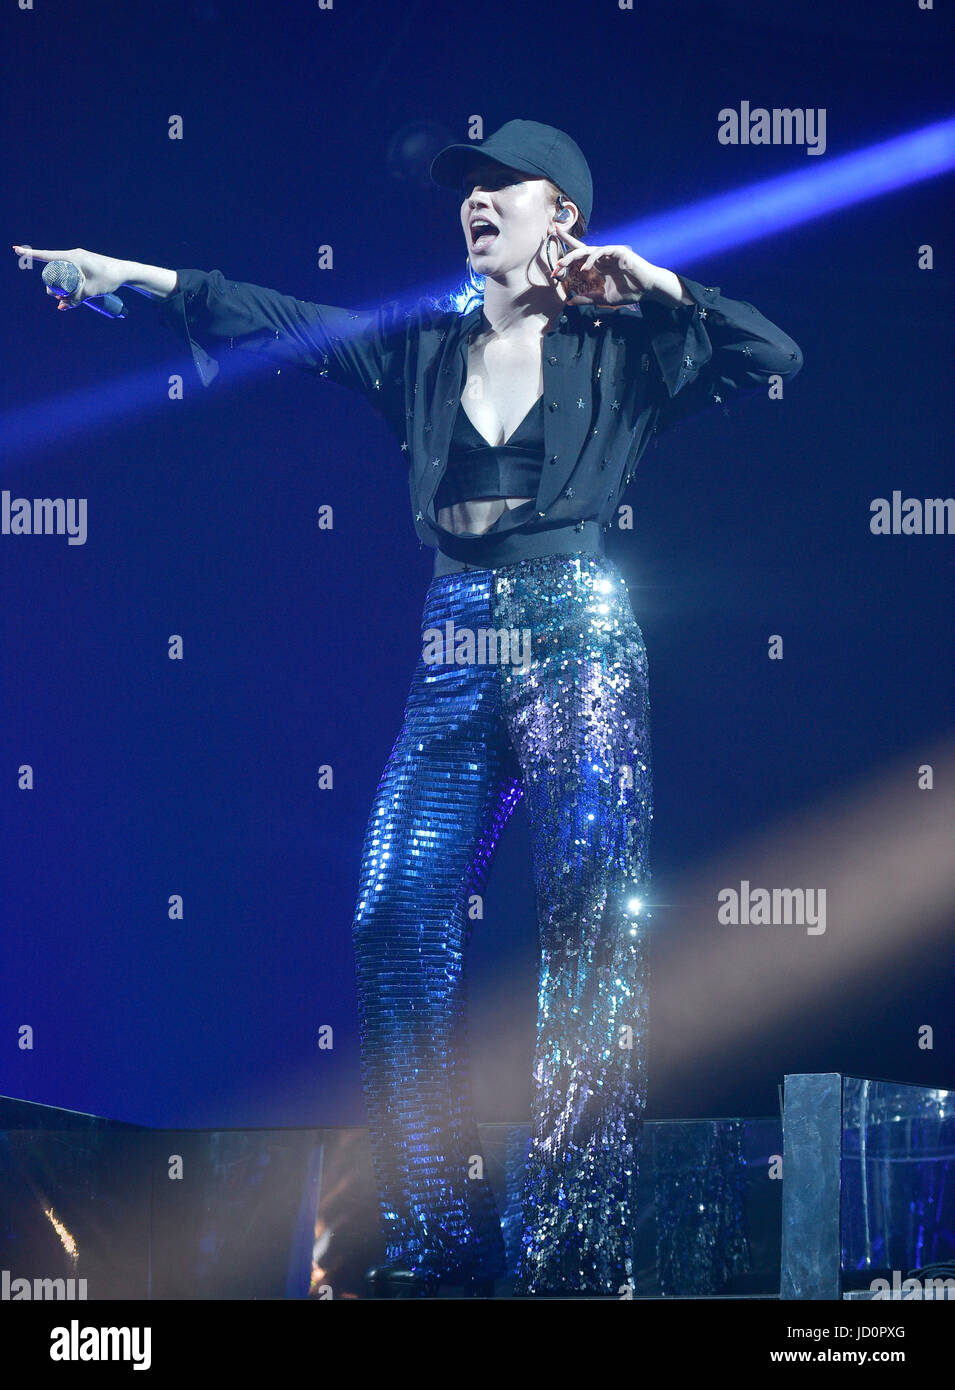 Glasgow, Scotland, UK. 17th June, 2017. Girlguiding concert featuring a star-studded line-up including Jess Glynne, Pixie Lott, Louisa Johnson, John Newman, JP Cooper, Birdy and 5 After Midnight. PICTURED at The SSE Hydro, Glasgow Jess Glynne in concert. Credit: sandy young/Alamy Live News Stock Photo